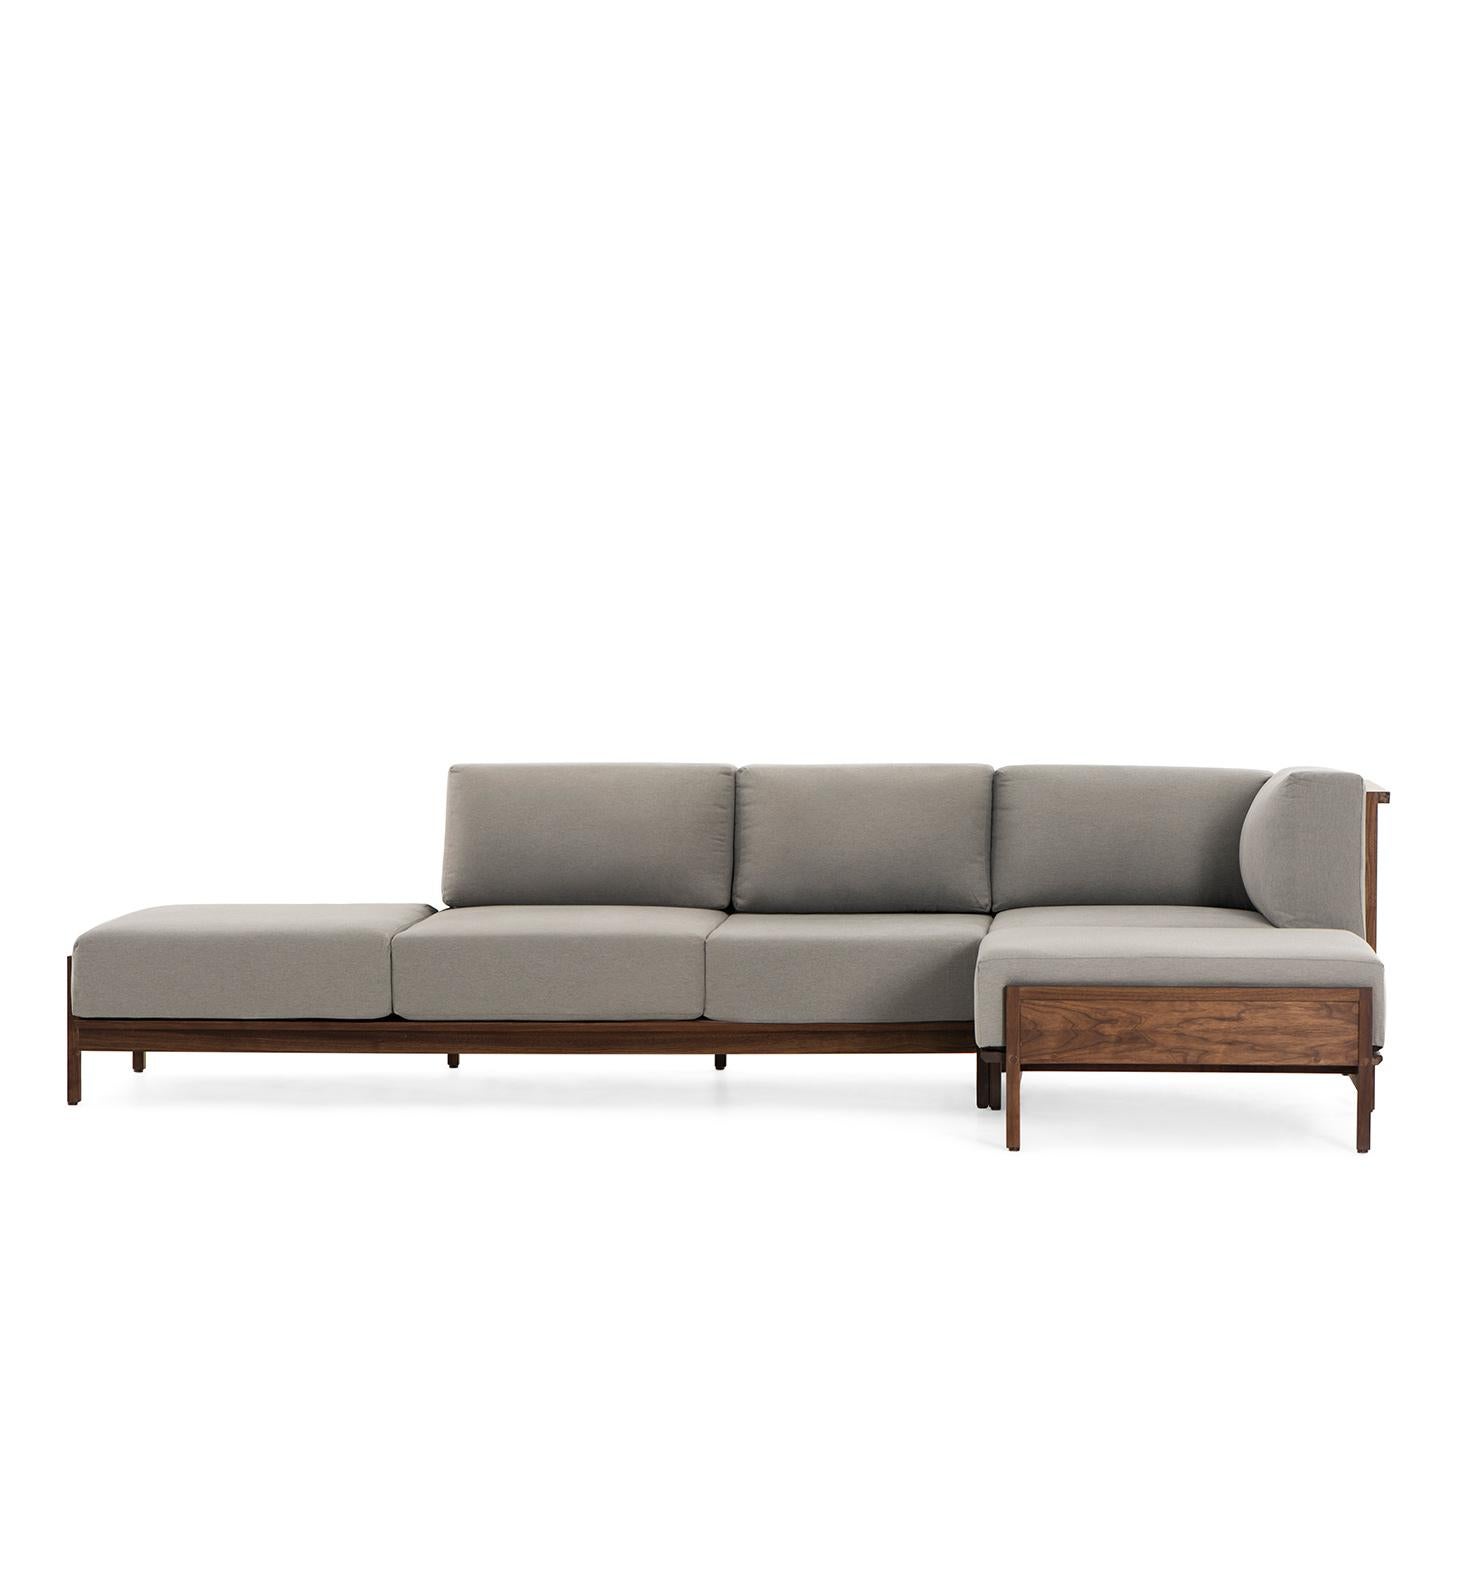 Introducing the Escuadra Confort, a natural and inevitable evolution of the CONFORT sofas and ottomans. This remarkable piece combines solid wood structures with a soft cushioning system, creating a perfect balance of comfort and style. The Escuadra